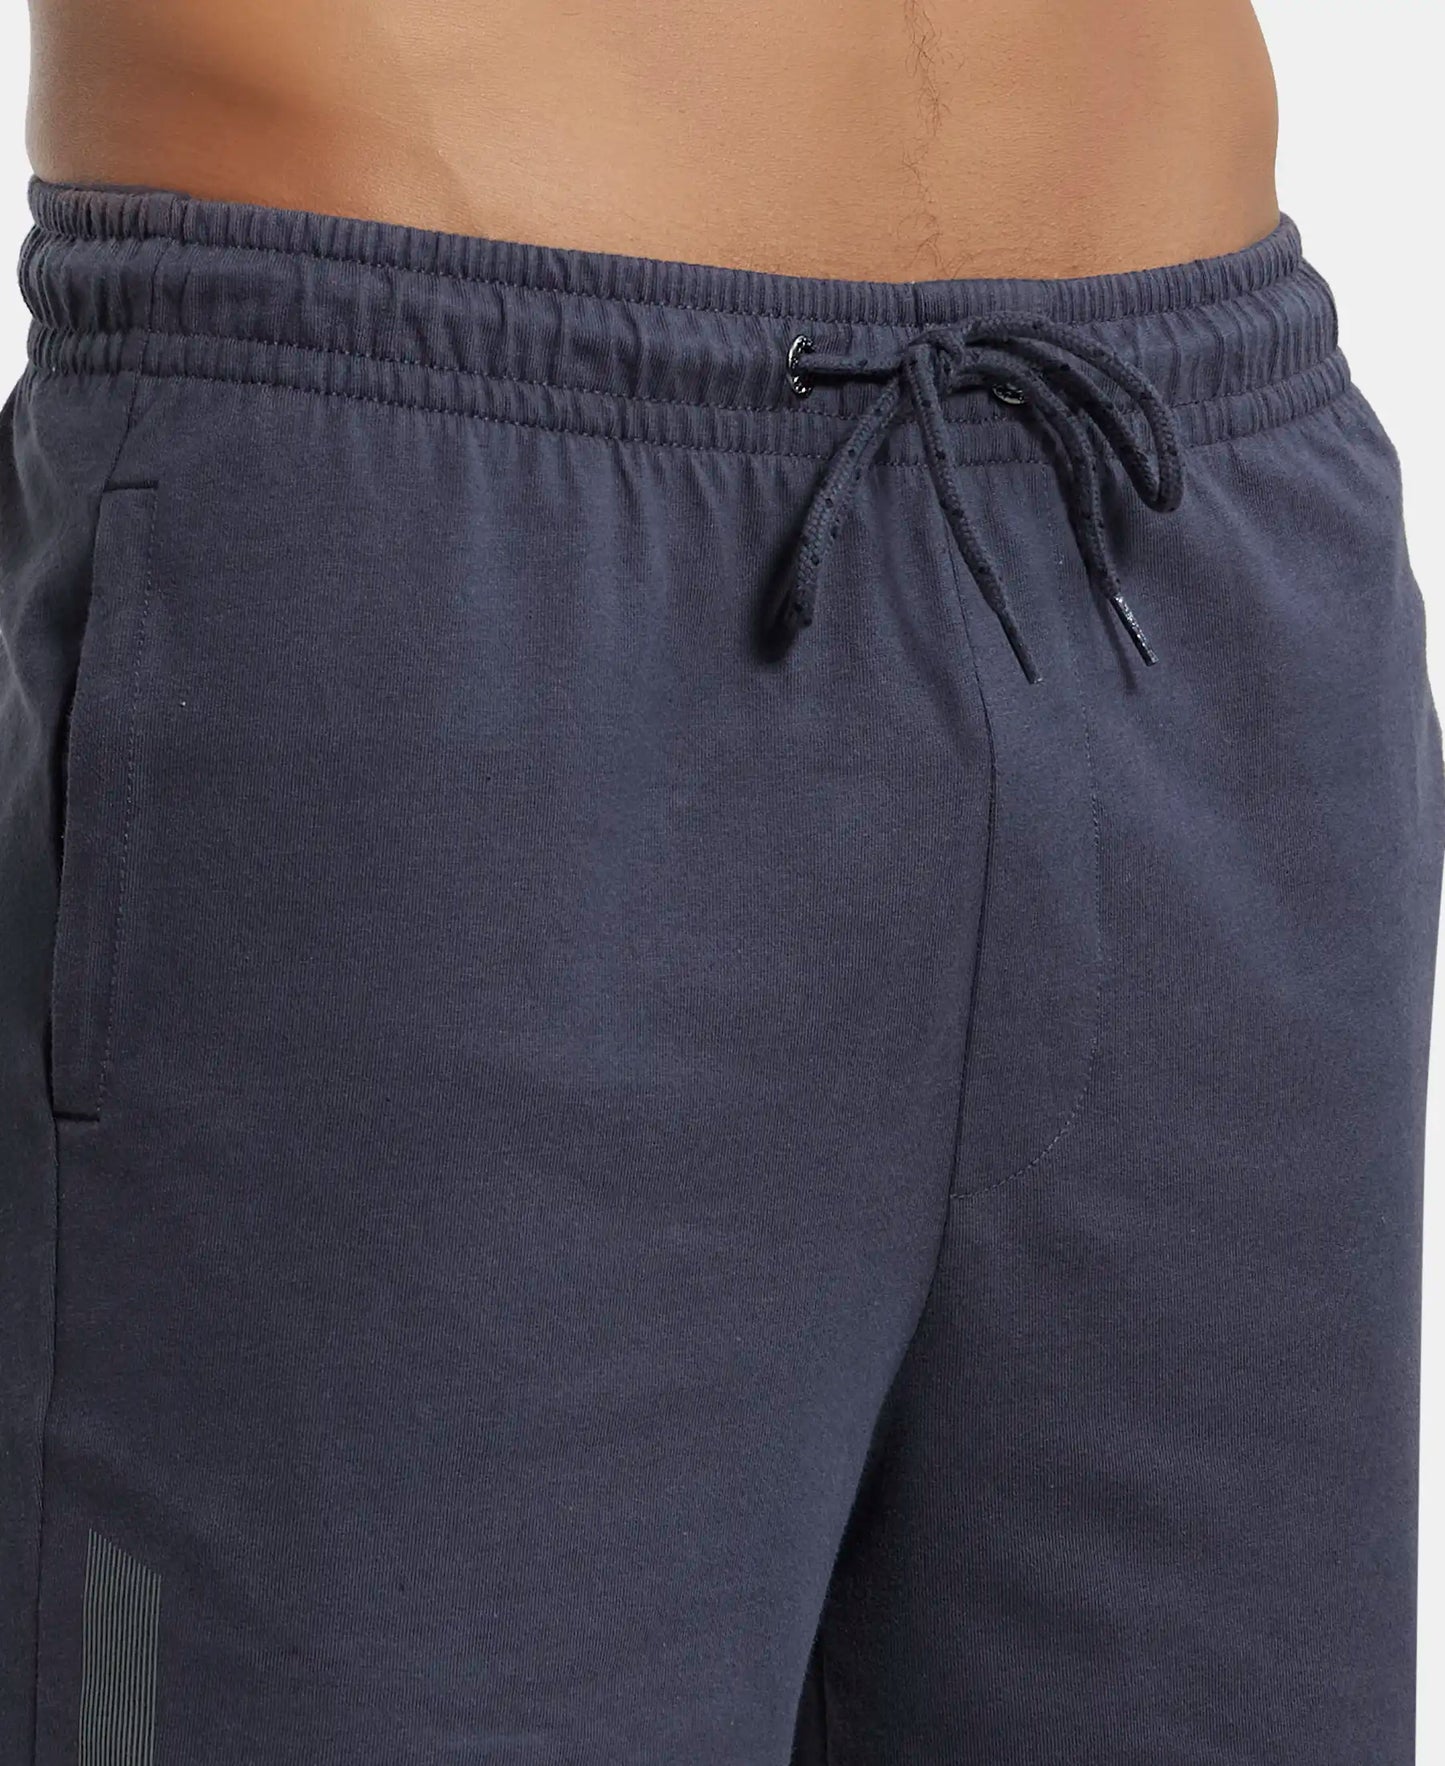 Super Combed Cotton Straight Fit Shorts with Side Pockets - Graphite-6